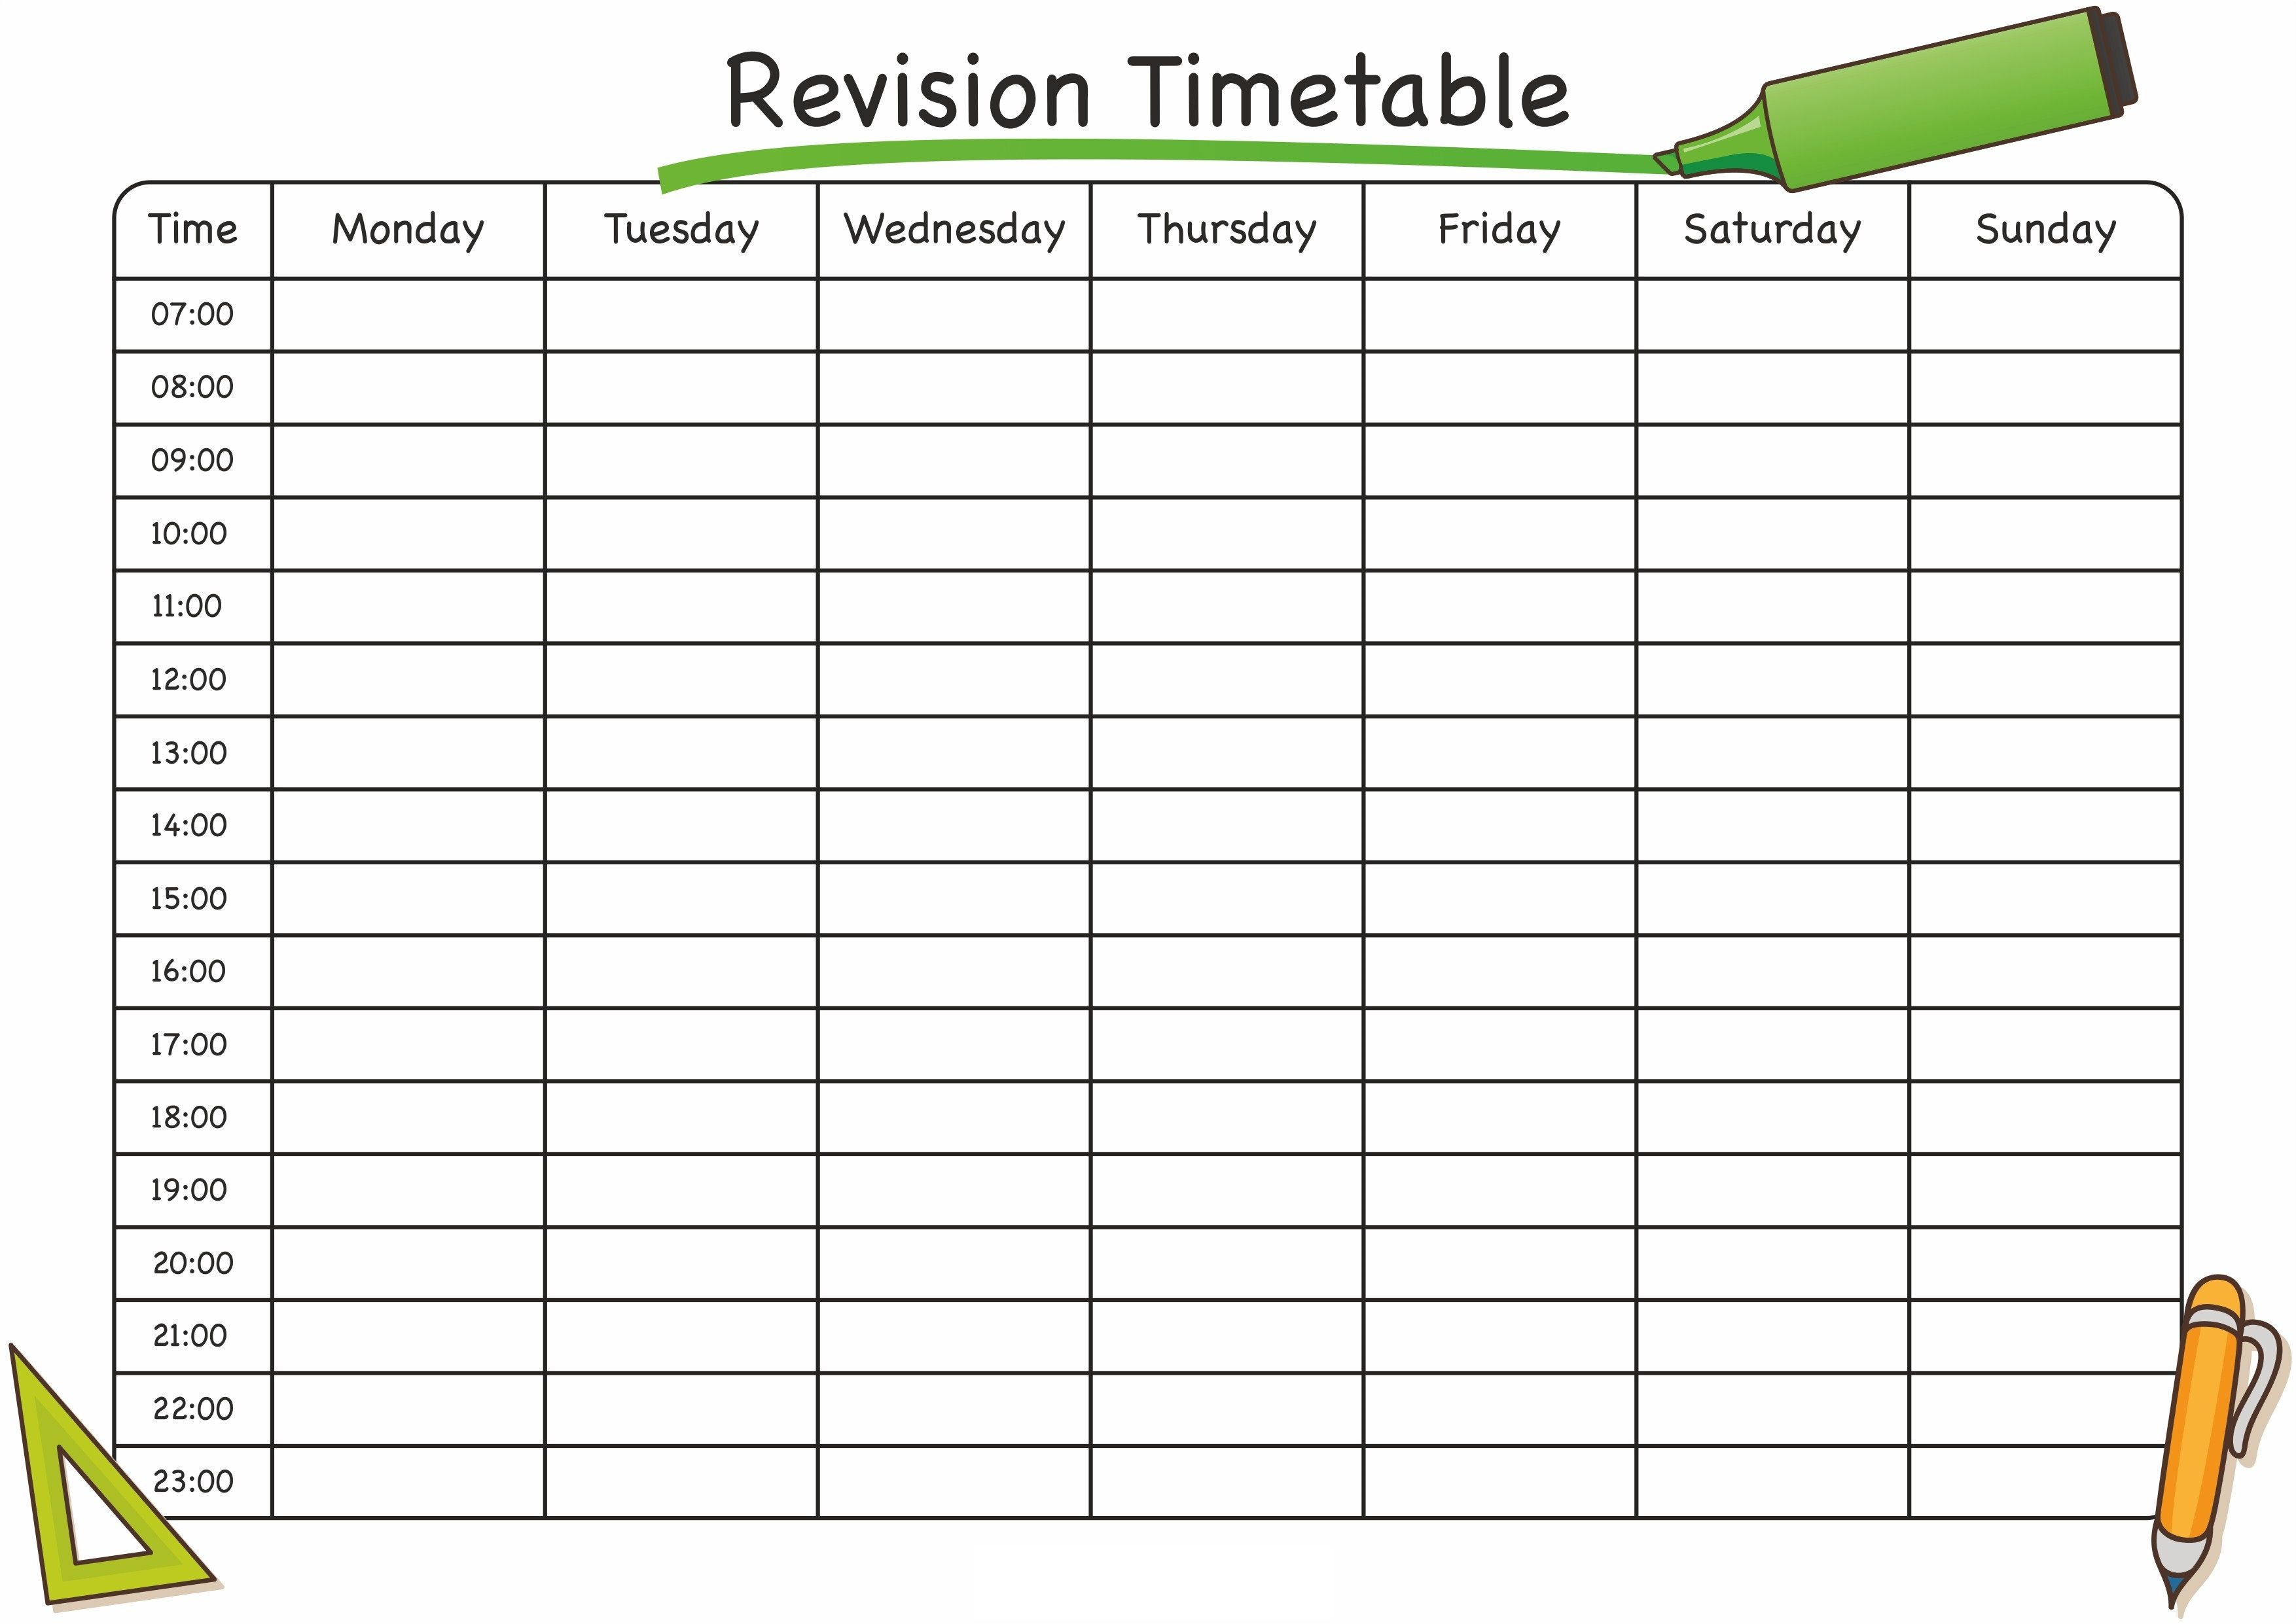 Timetable Template Free #timetabletemplateexcel | Timetable Intended For Blank Revision Timetable Template